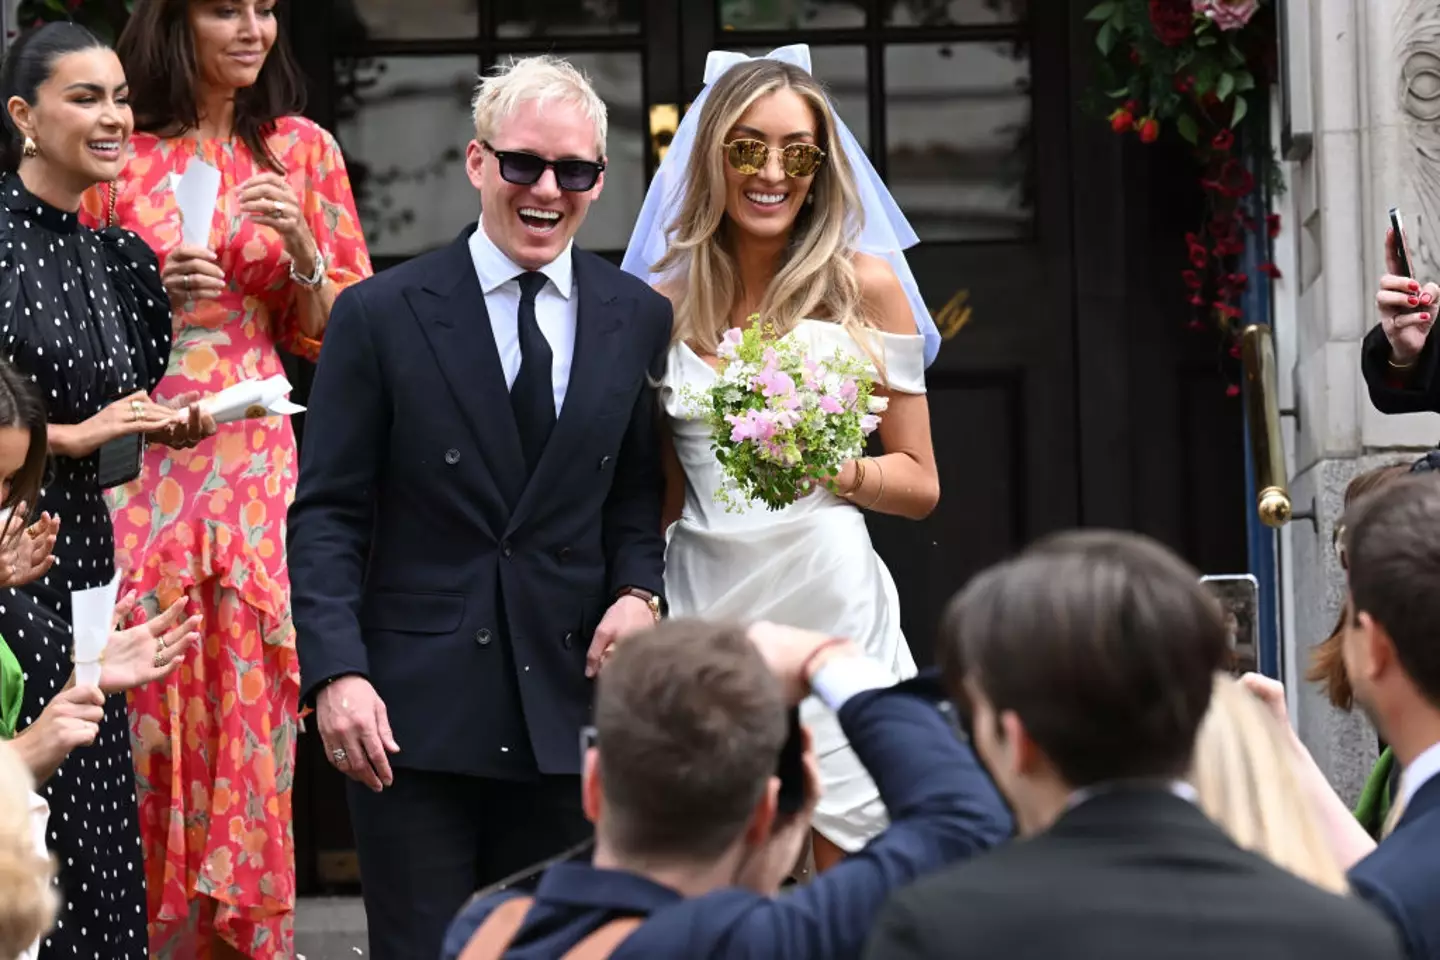 Married couple Jamie Laing and Sophie Habboo host the NewlyWeds podcast. (MEGA/GC Images/Getty Images)